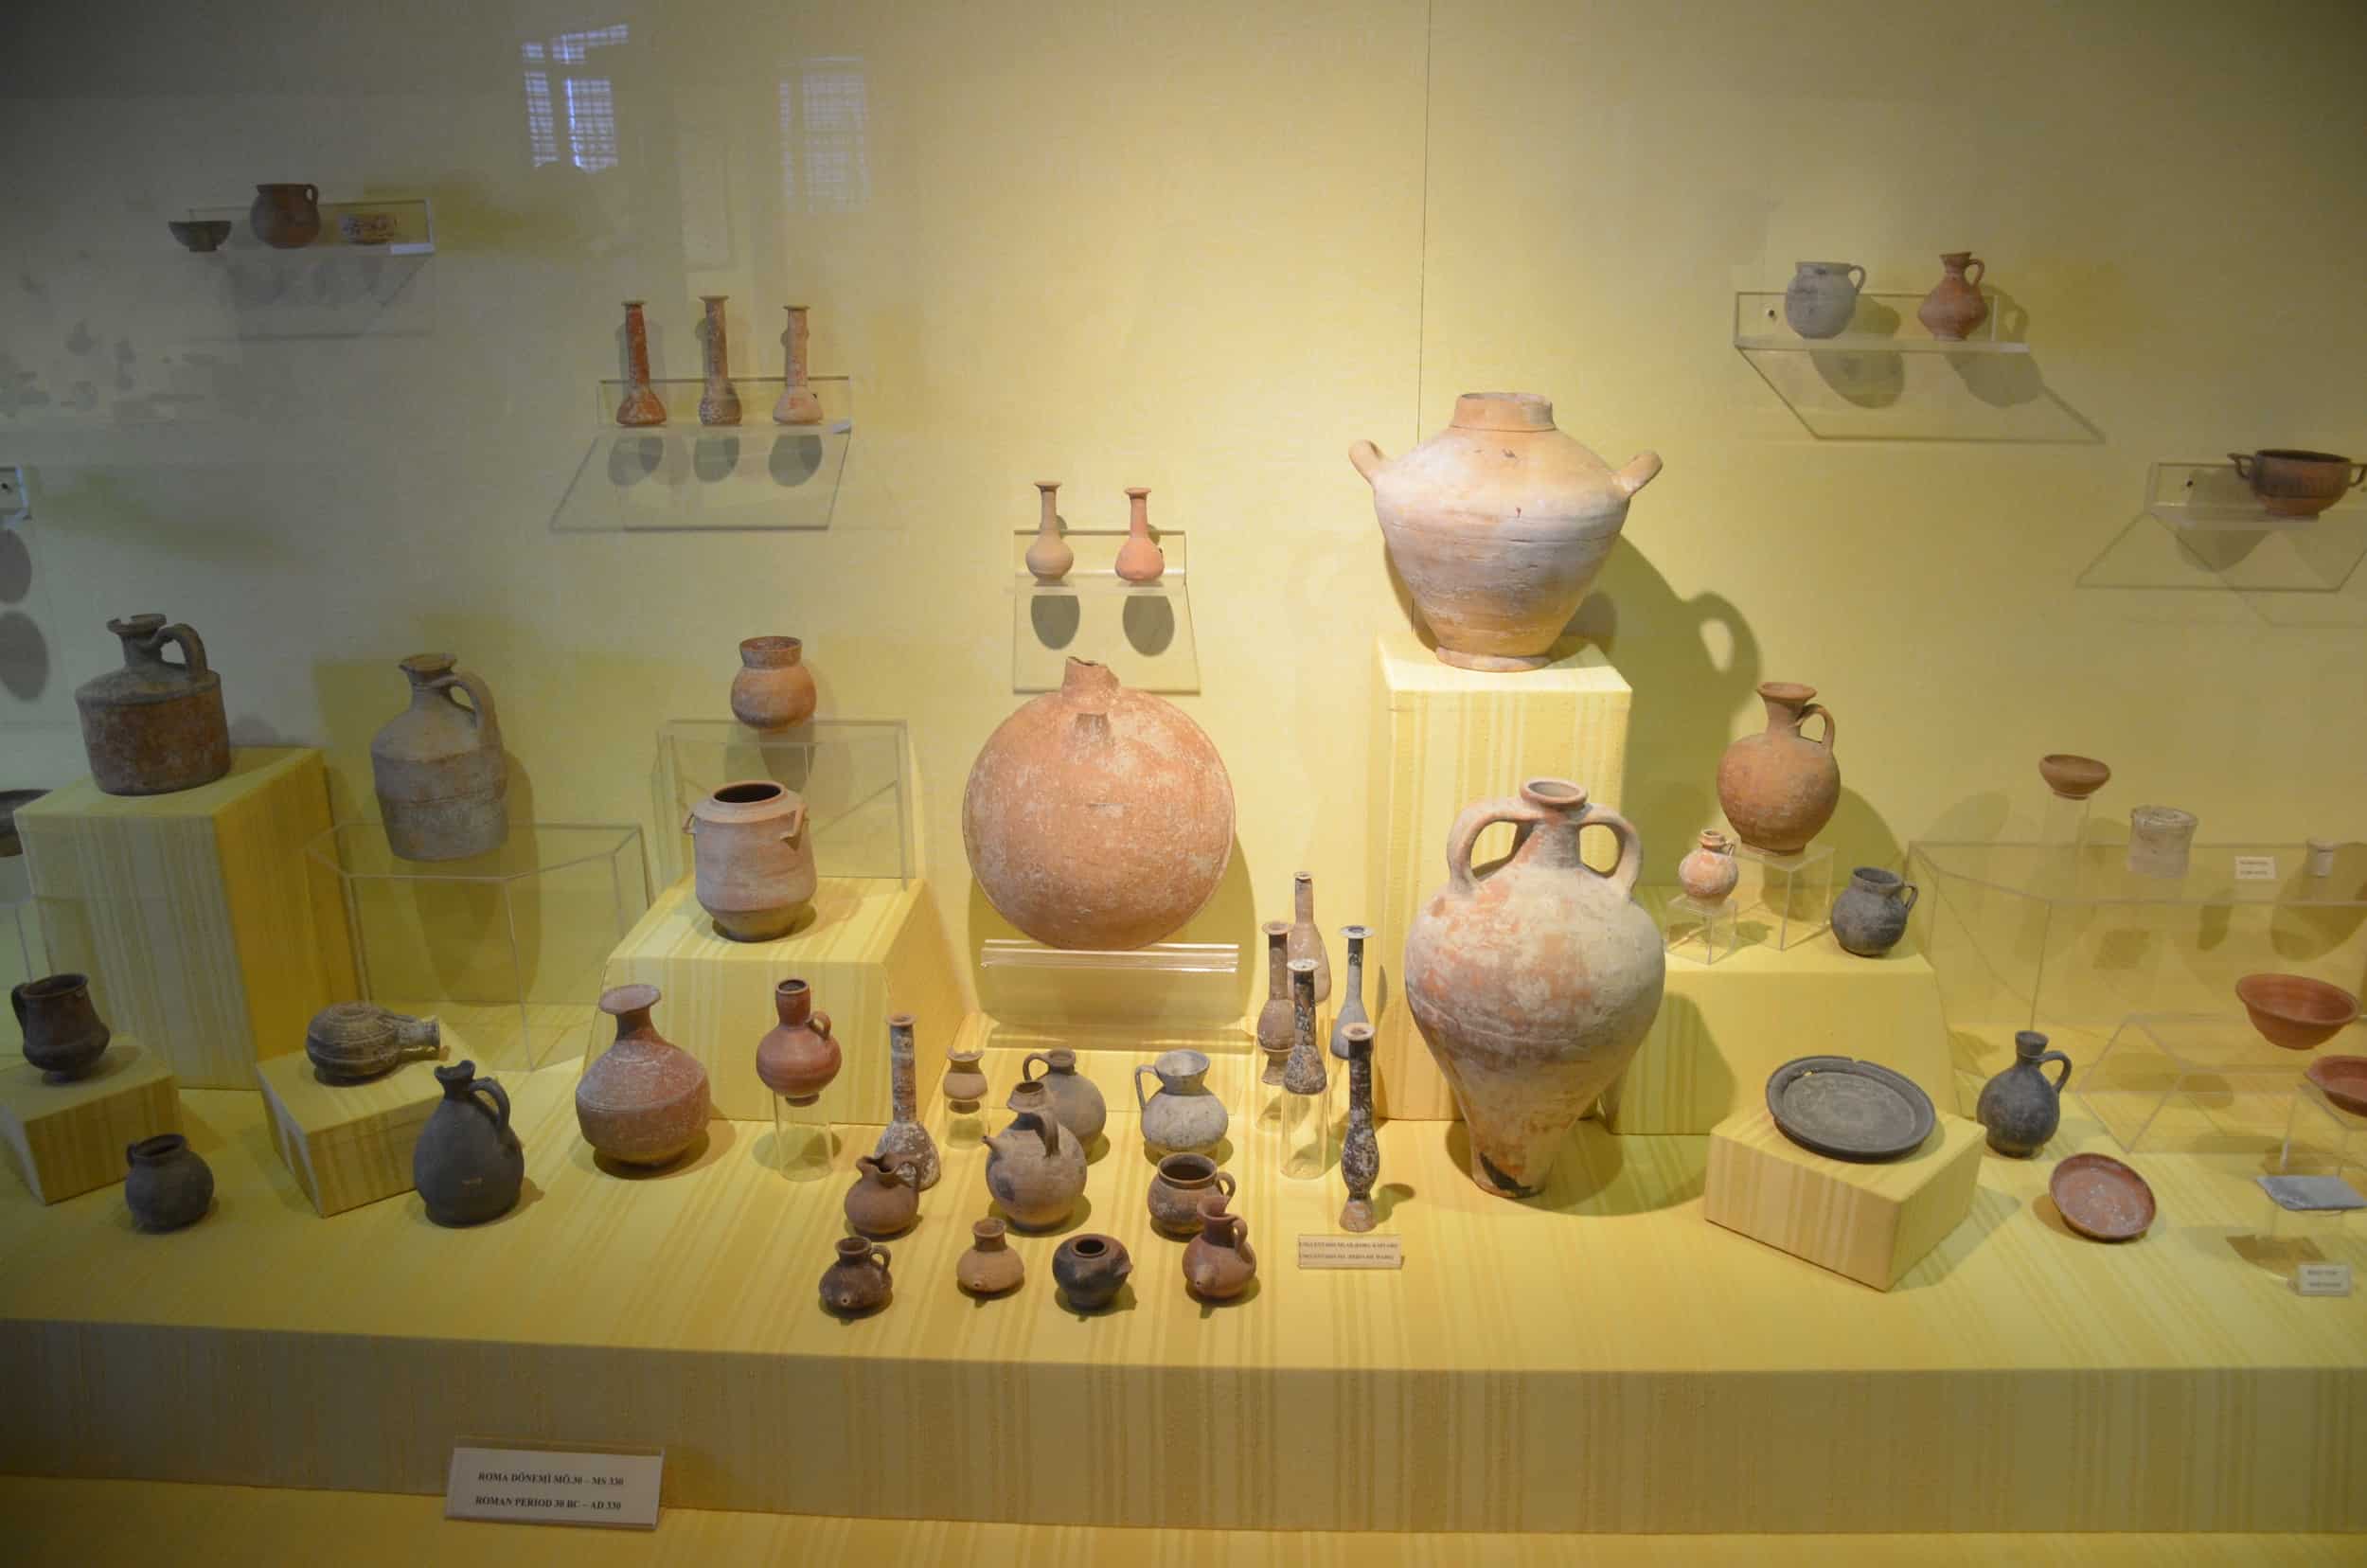 Roman period objects in the Small Artifacts Gallery at the Hierapolis Museum